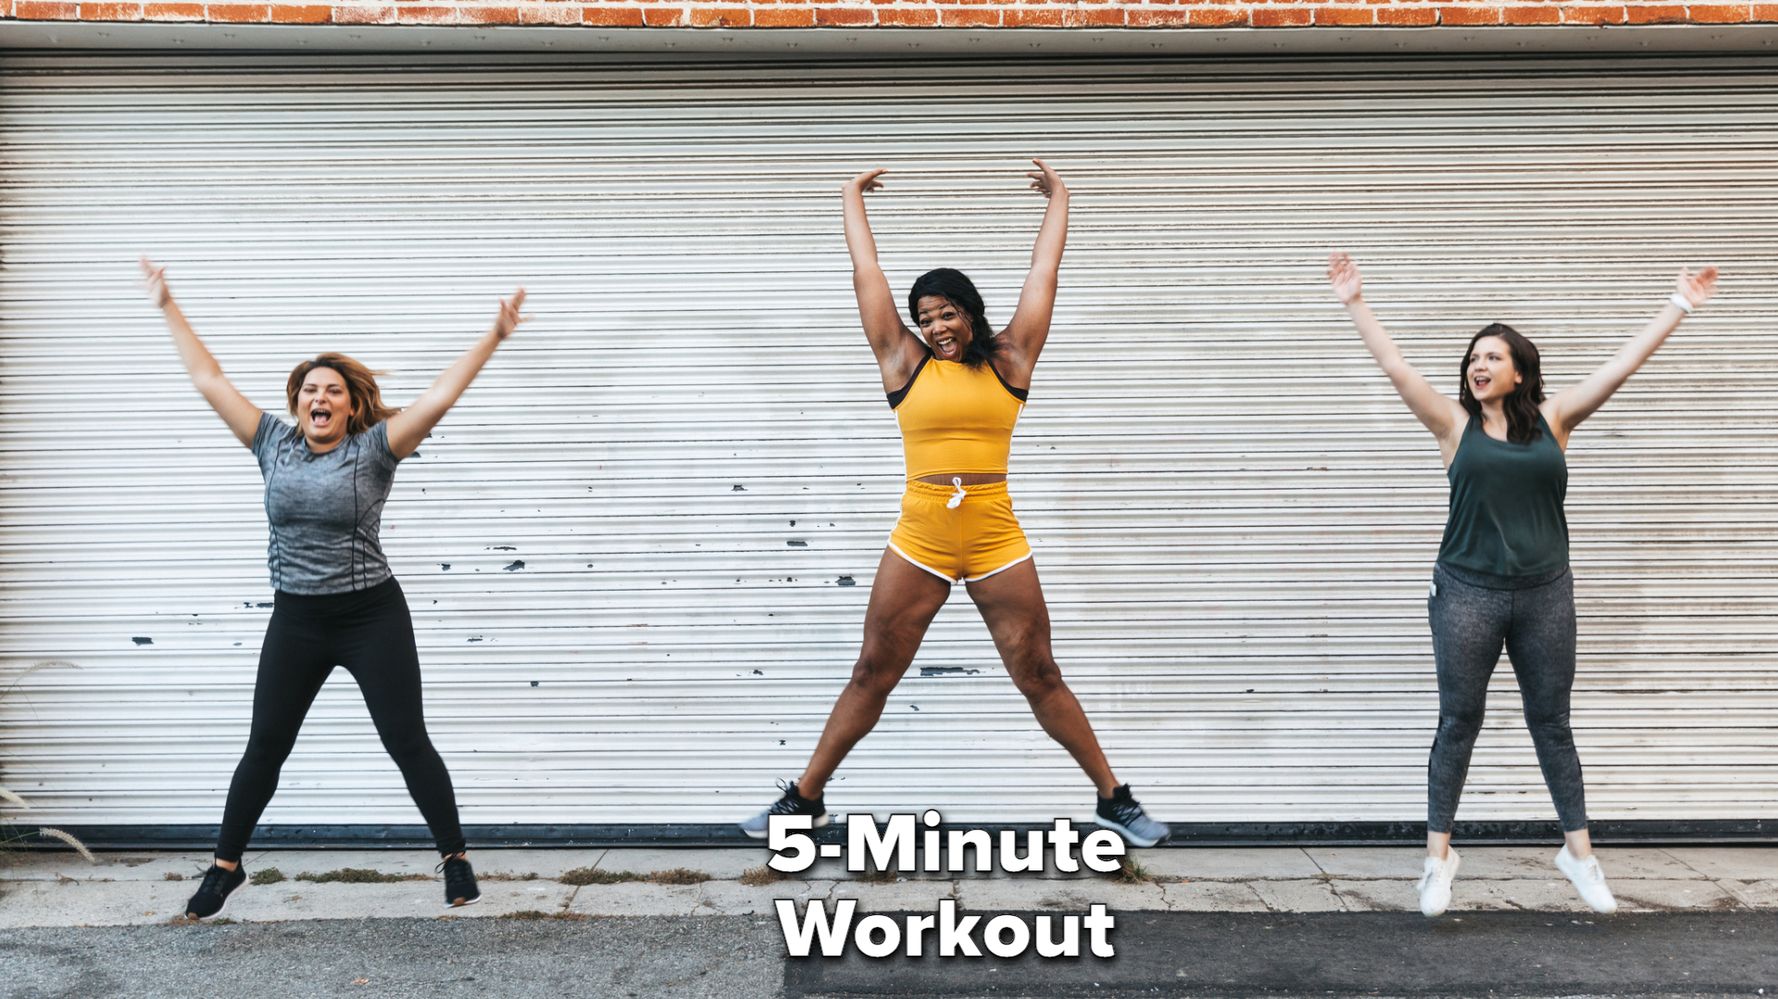 This 5-Minute Cardio Exercise Will Get Your Blood Pumping